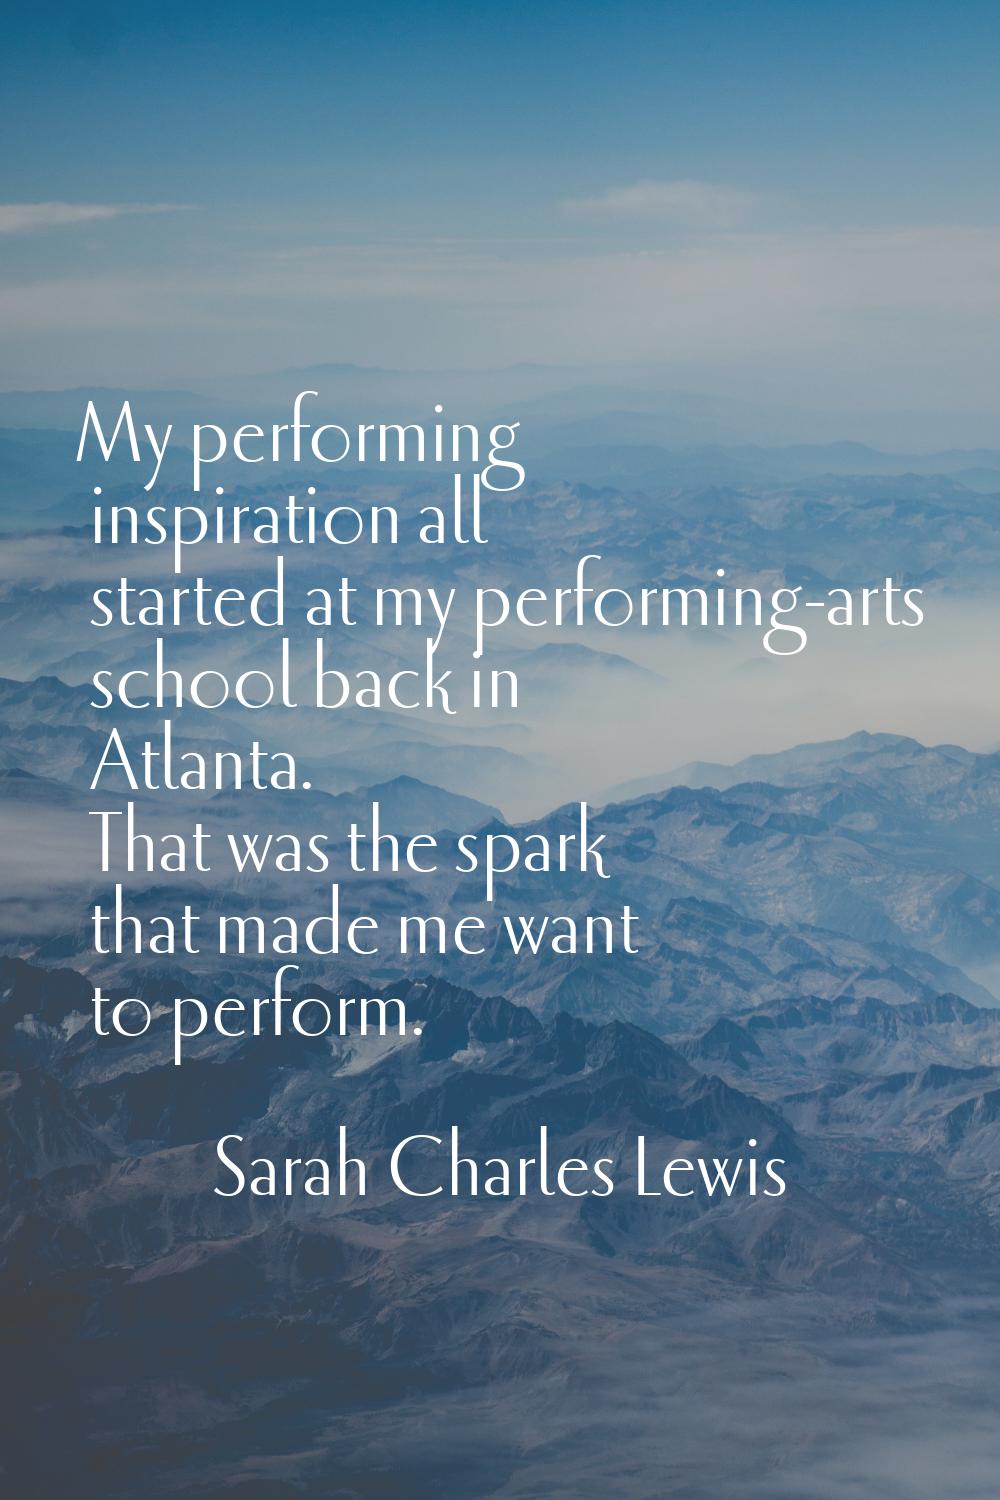 My performing inspiration all started at my performing-arts school back in Atlanta. That was the sp